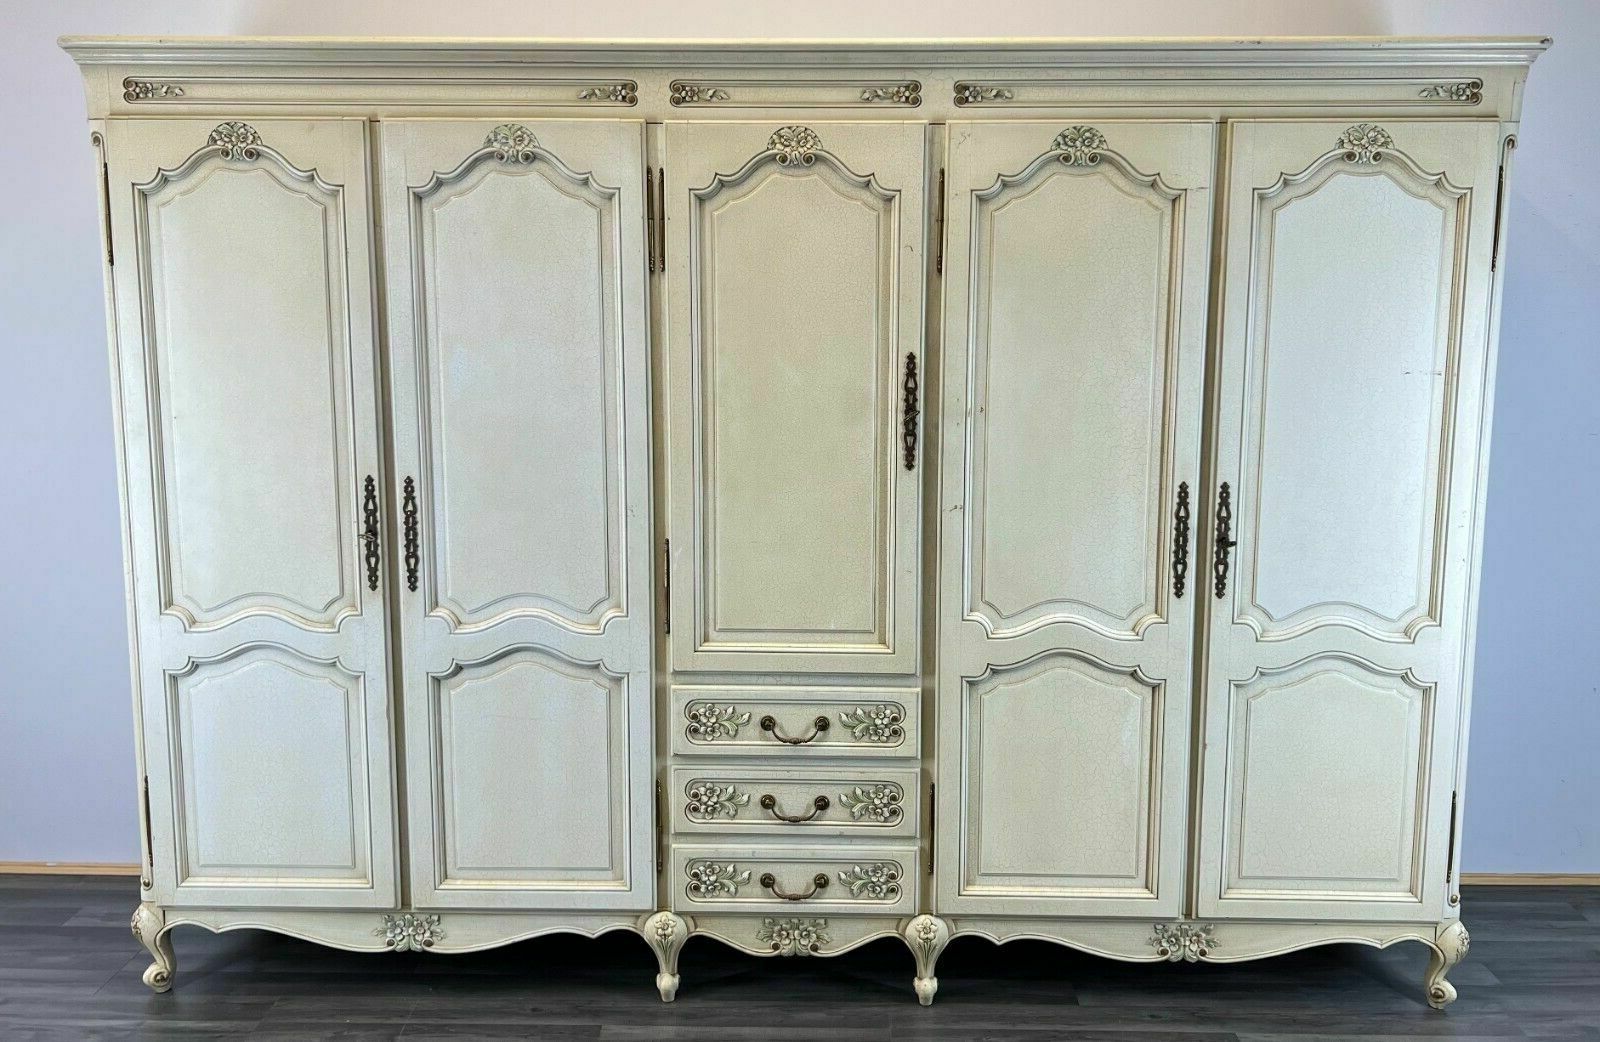 Louis Xv Style Shabby Chic French Carved 5 Door Armoire Wardrobe | Vinterior Within French Shabby Chic Wardrobes (Gallery 15 of 20)